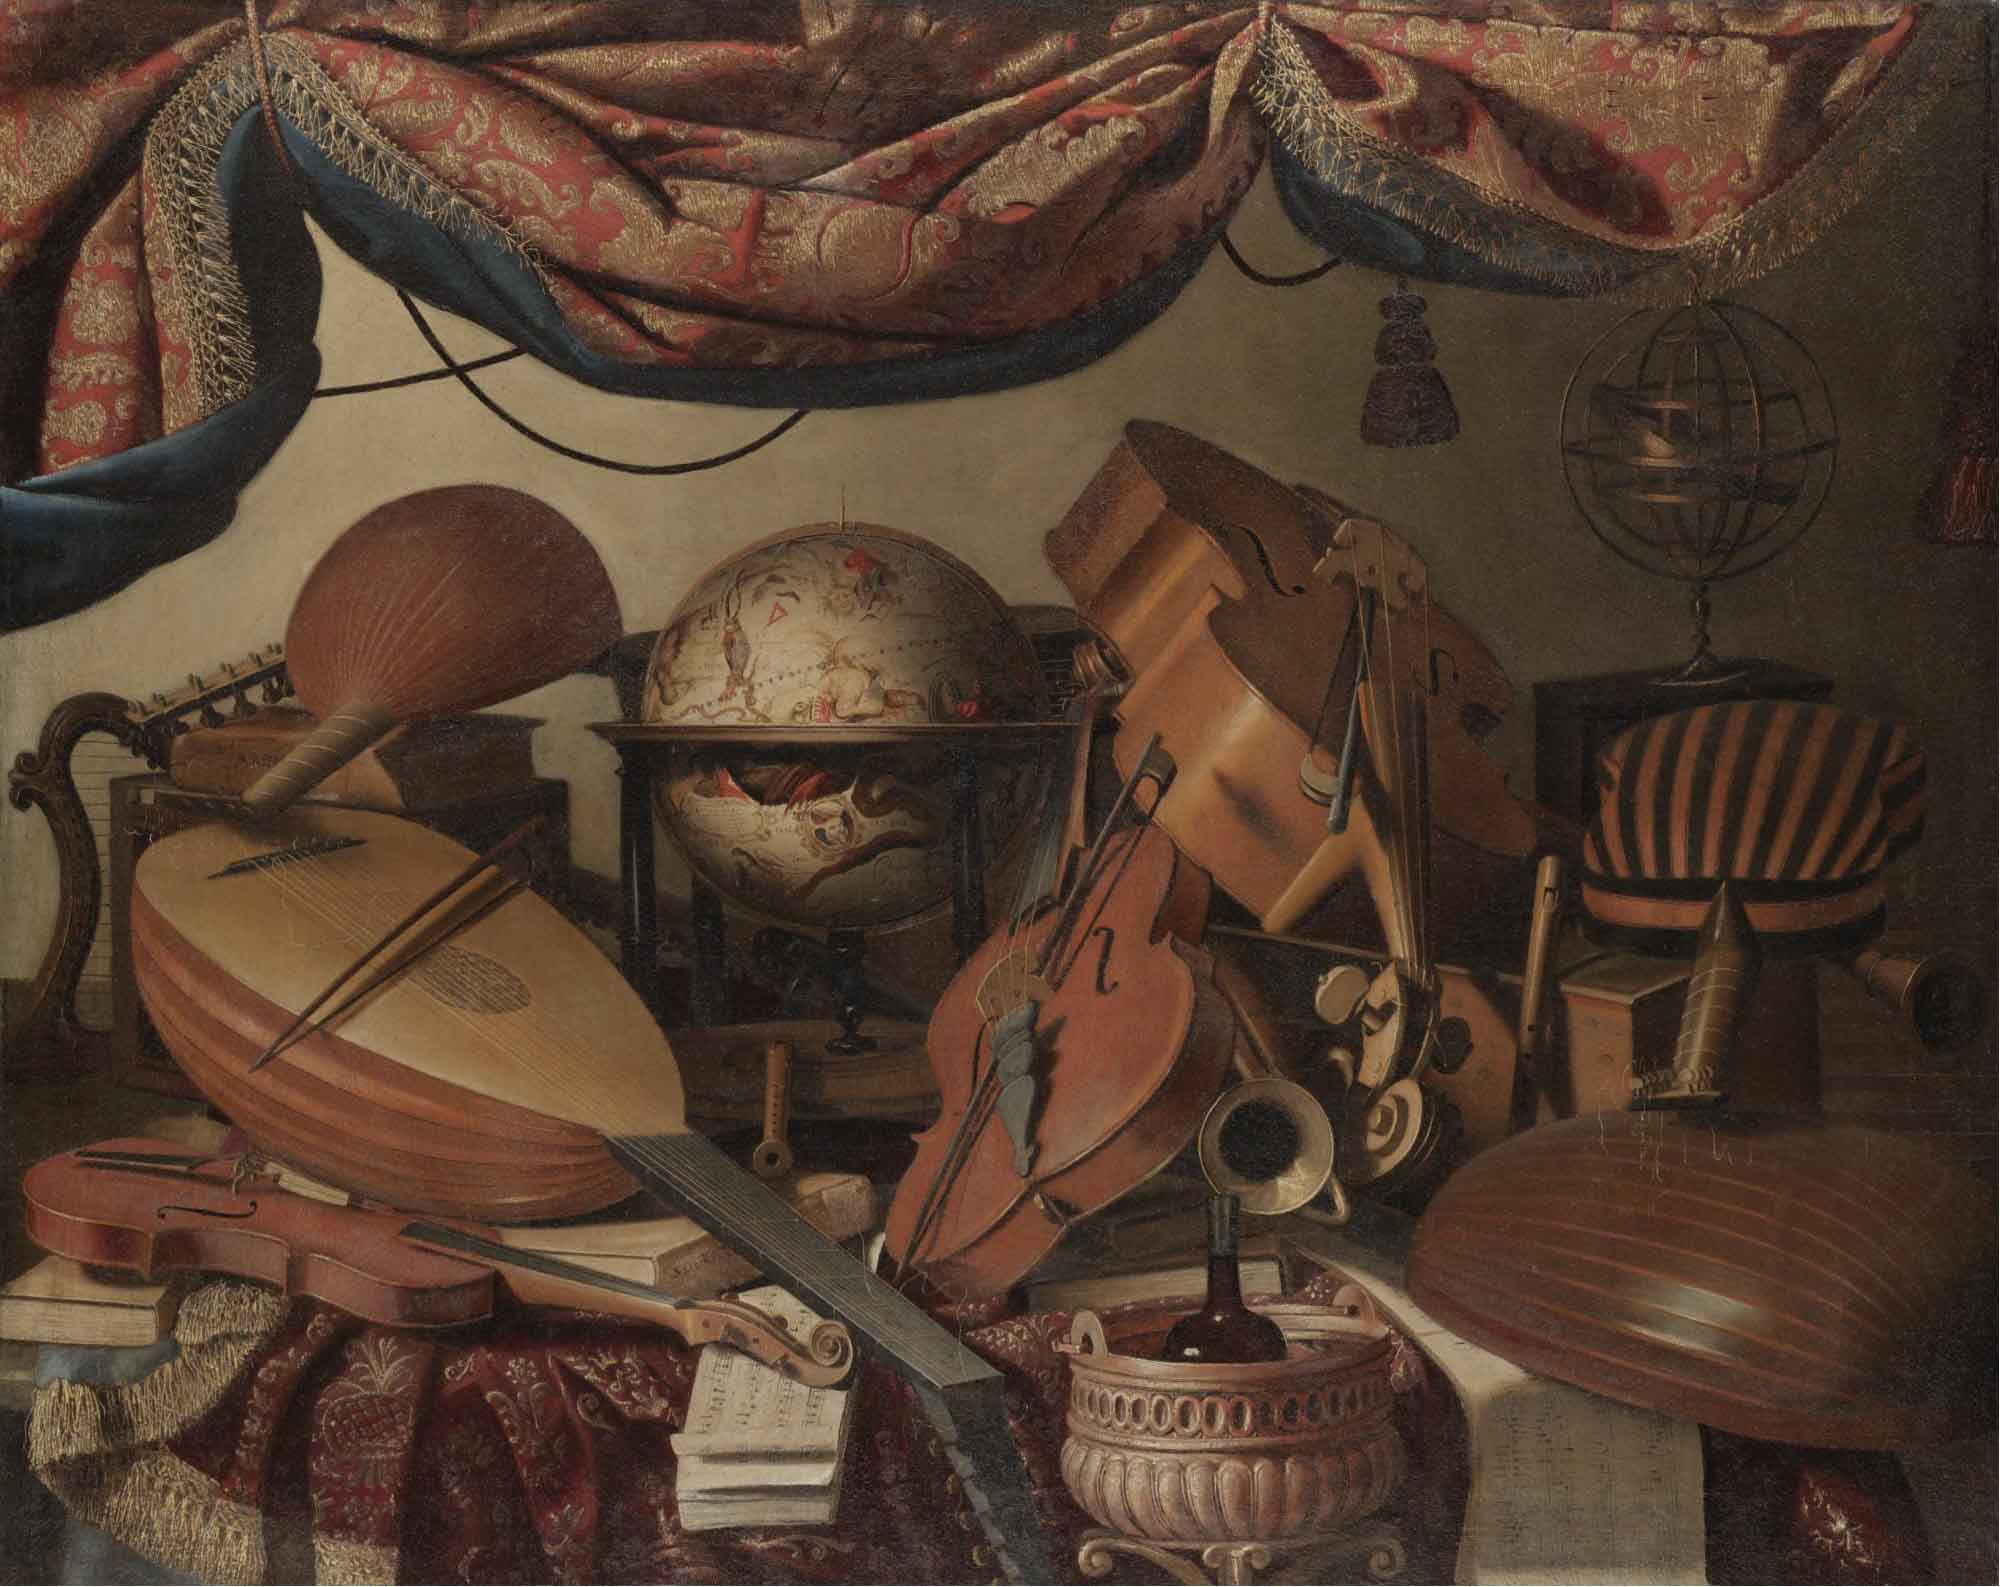 A Still Life with Musical Instuments including a Viola